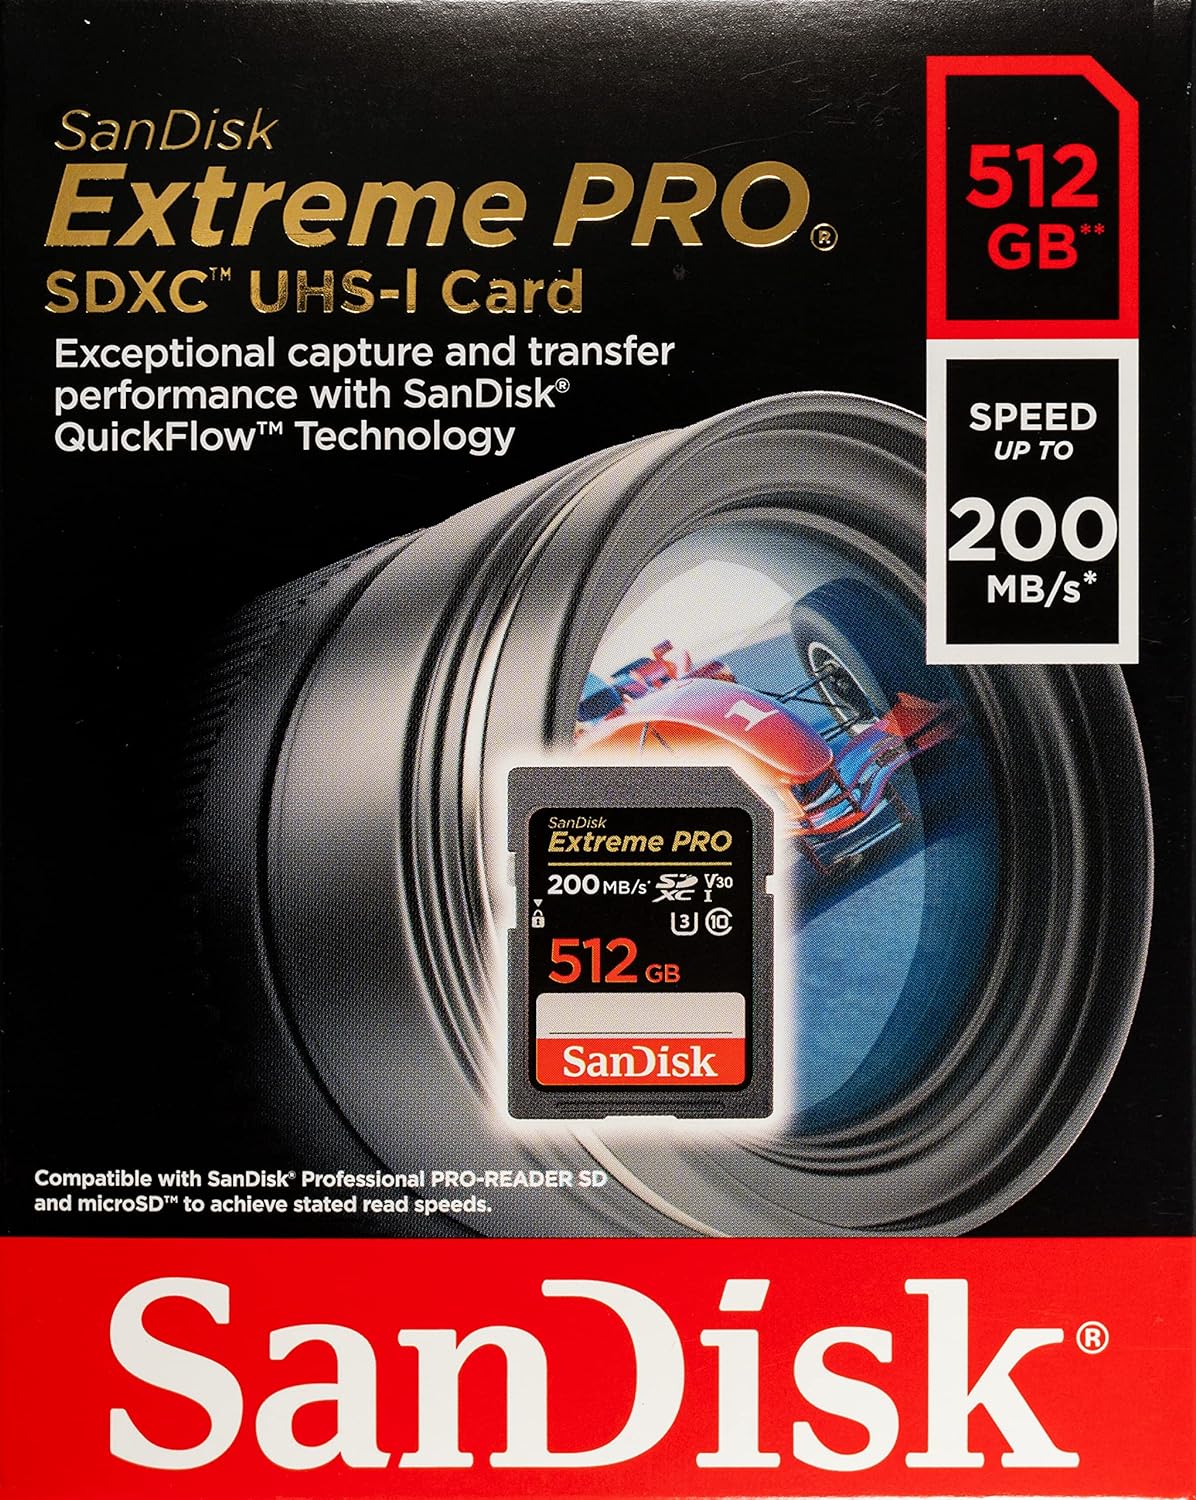 SanDisk 512GB Extreme Pro SD Memory Card SDXC Card for Sony Alpha a7C, a6600, a6100, a6400 Camera (SDSDXXD-512G-GN4IN) Class 10 Bundle with (1) Everything But Stromboli 3.0 Micro & SD Card Reader